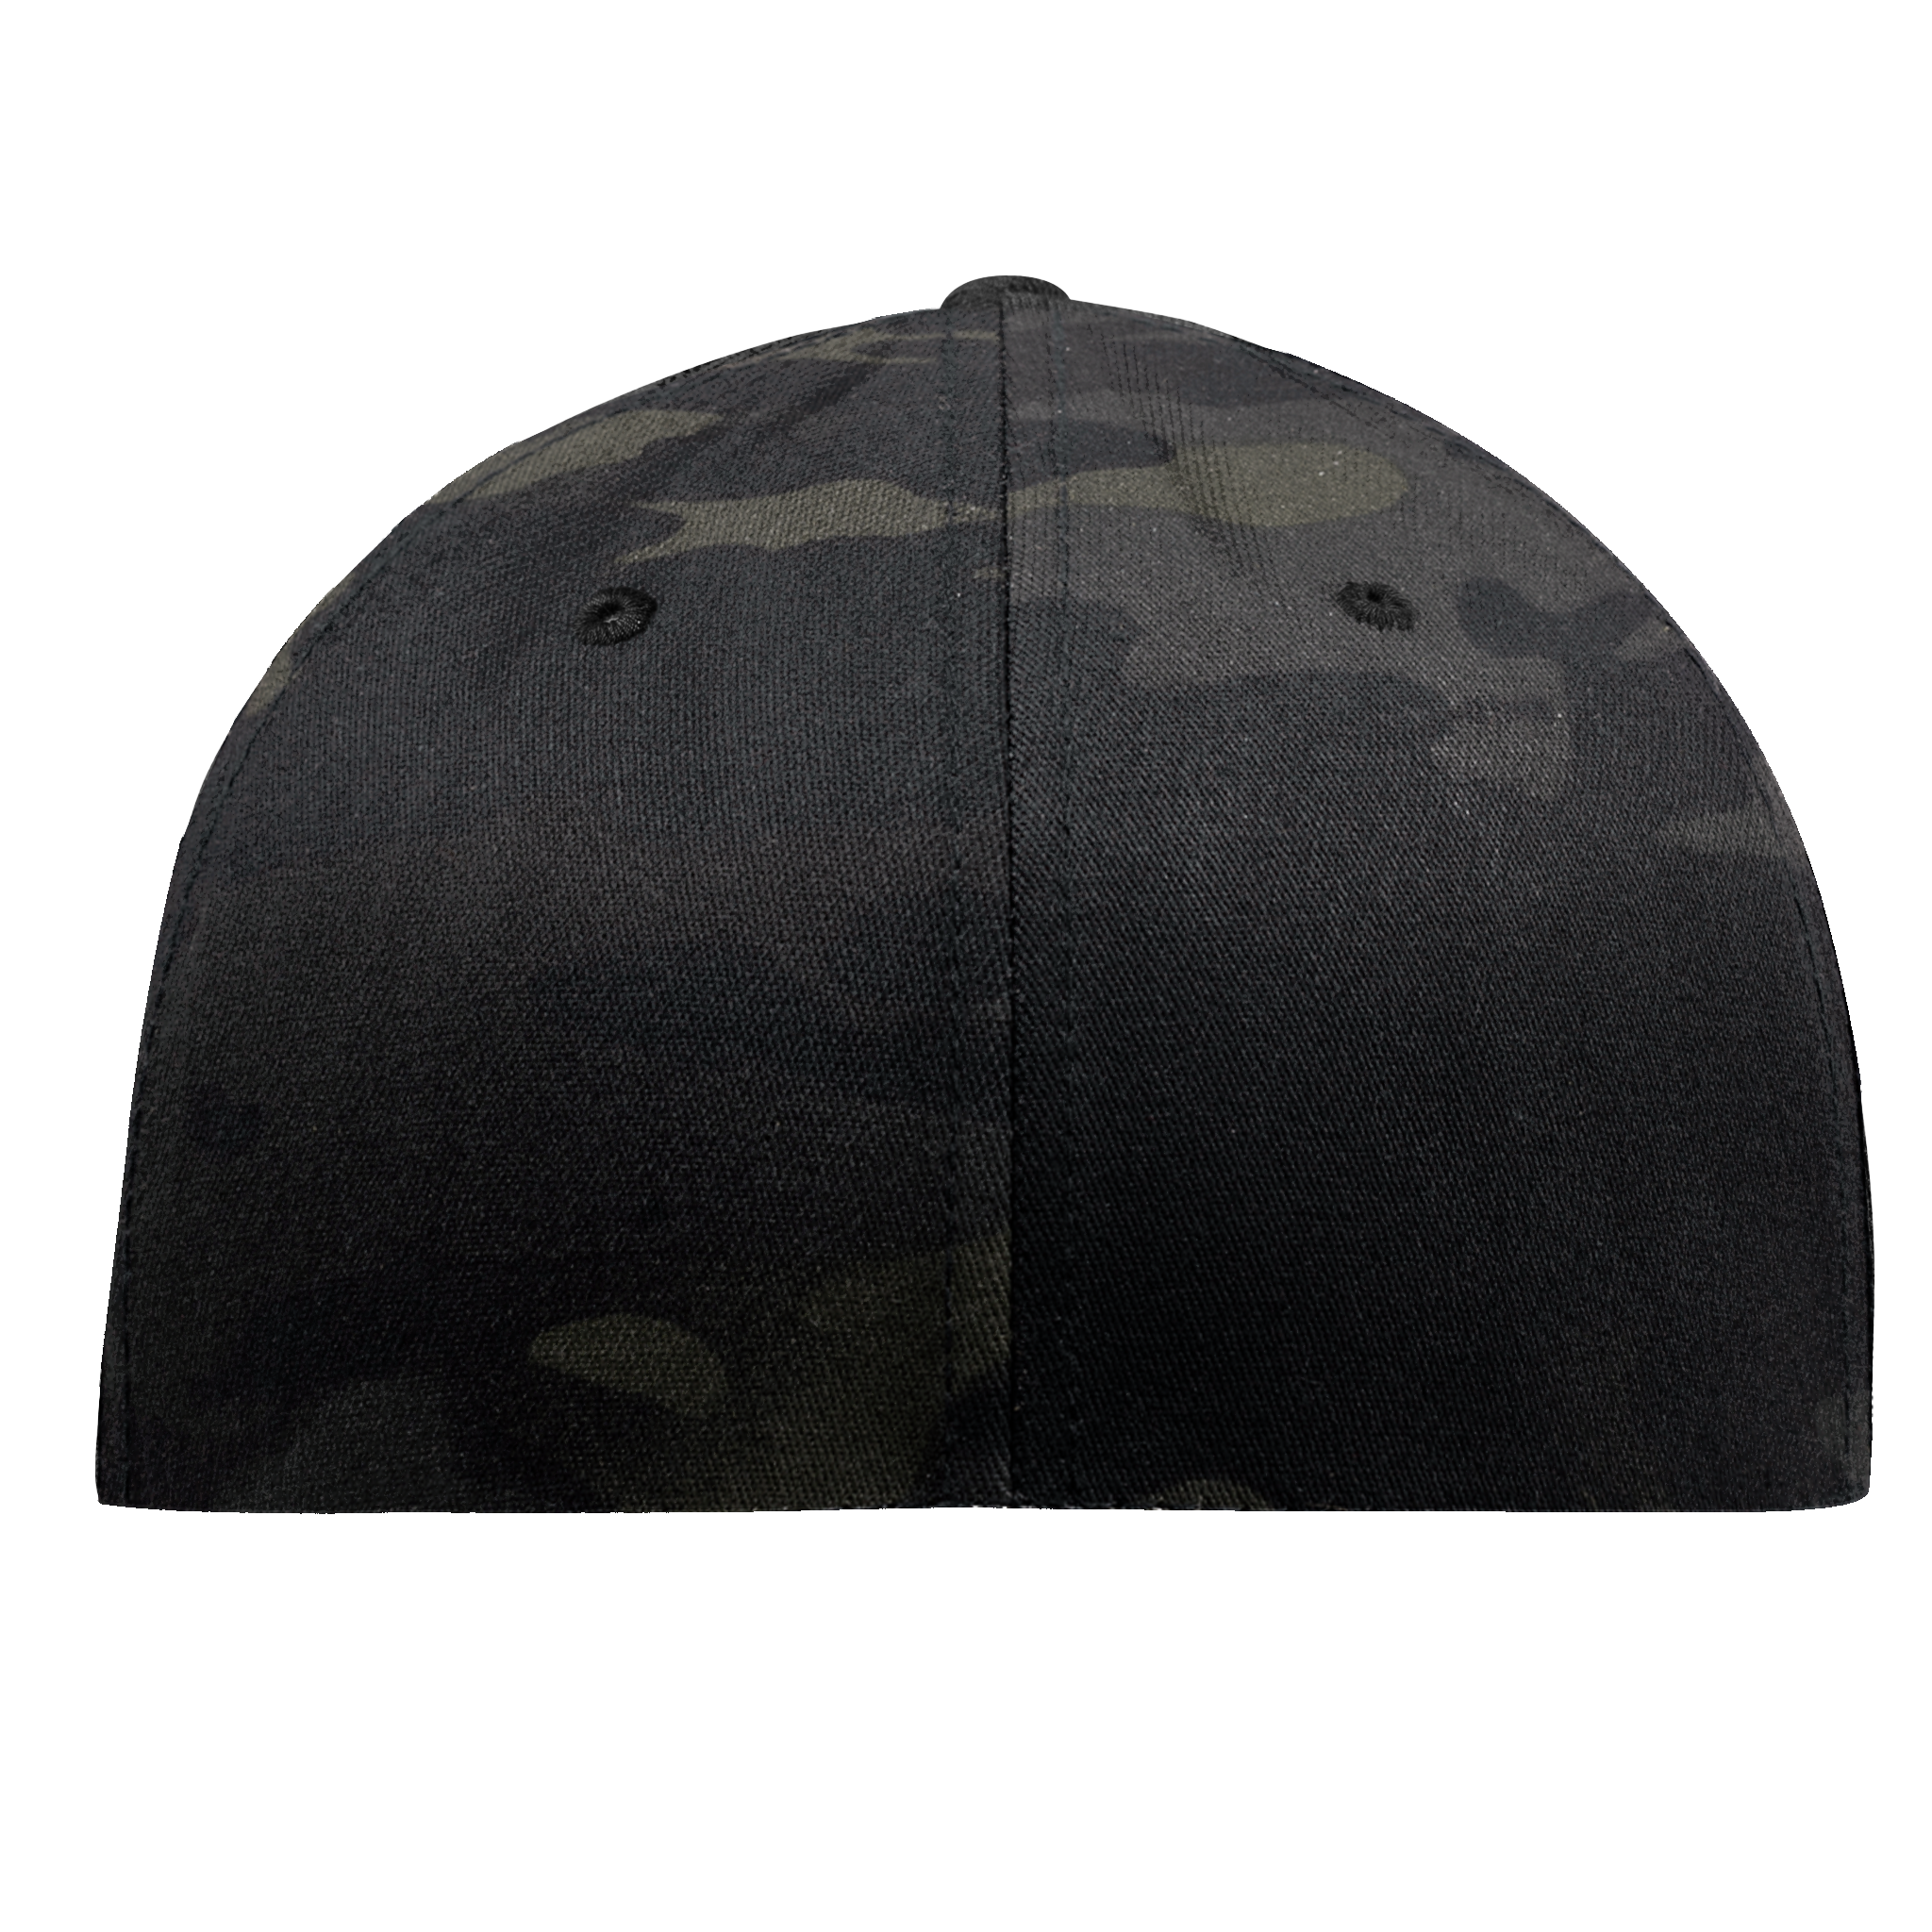 1776 Midnight Flexfit Fitted Back Multicam